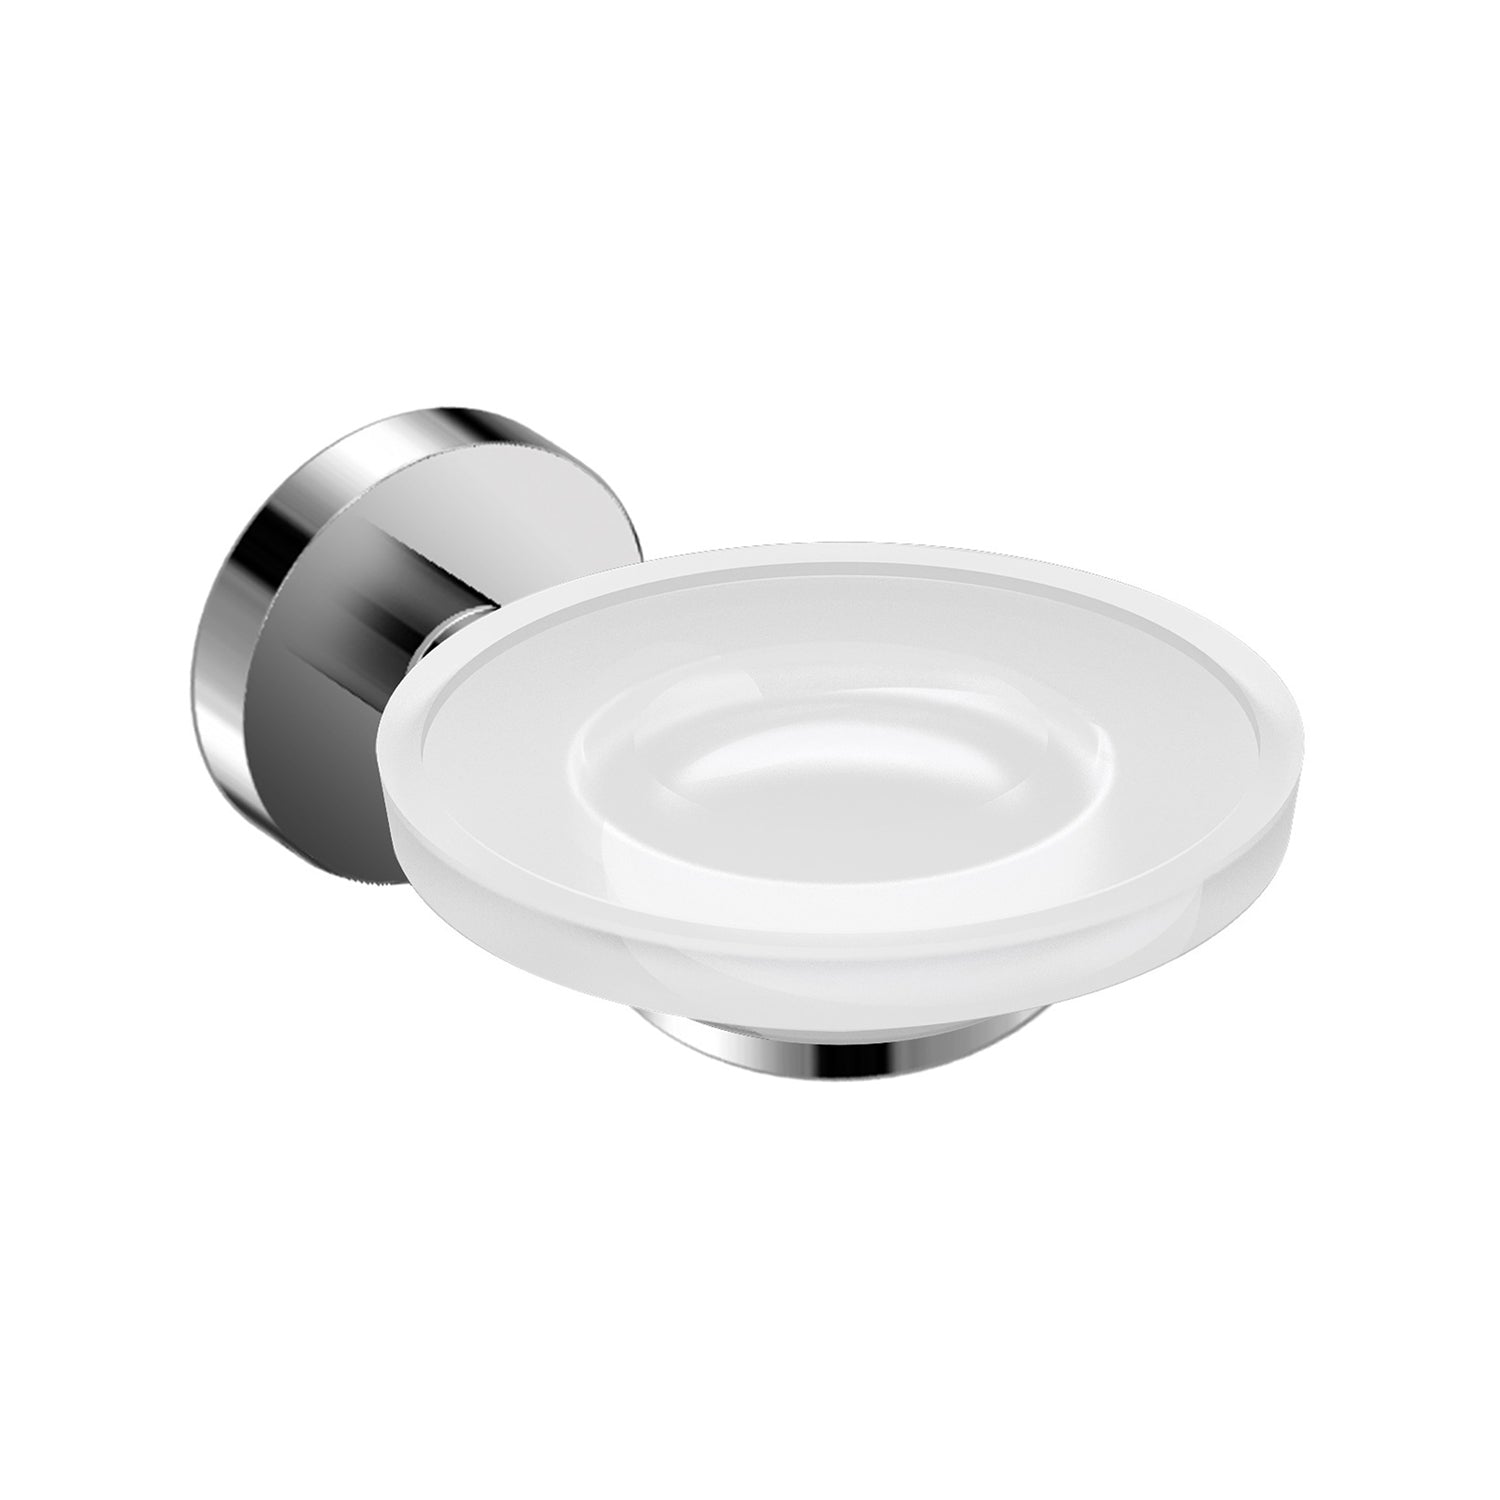 DAX Valencia Soap Dish, Tray, Wall Mount, White Glass, Brushed Finish, 4-1/3 x 5-1/8 x 2 Inches (DAX-GDC120132-BN)